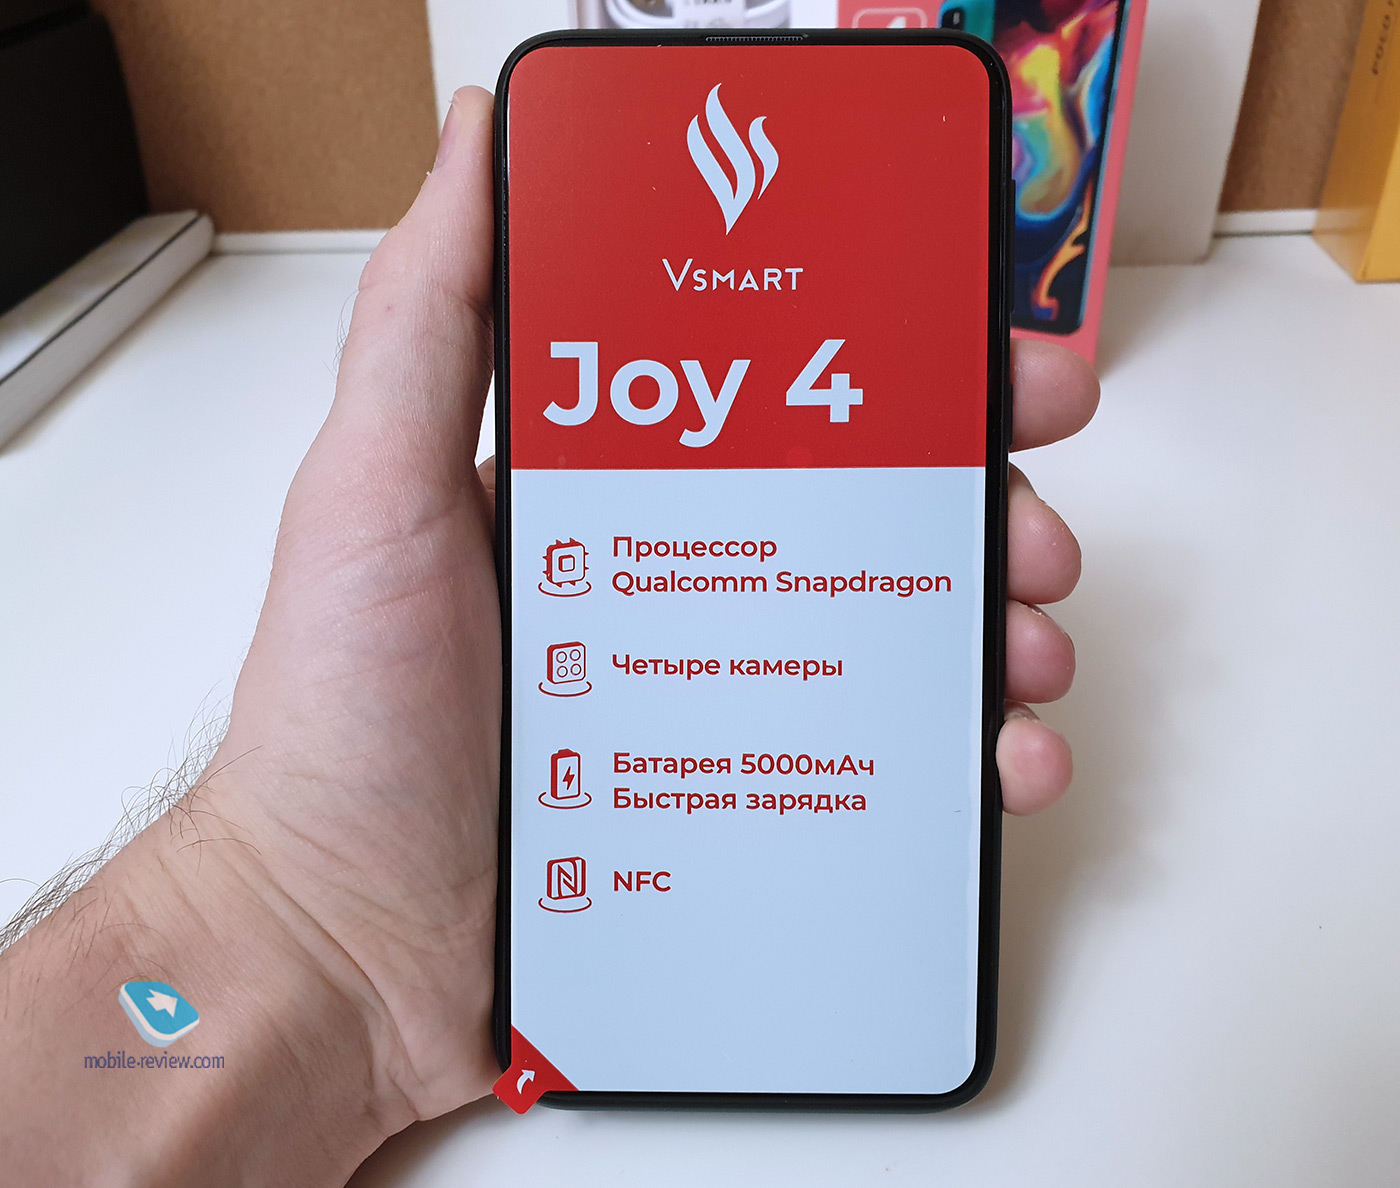 Vsmart Joy 4 review: NFC and Snapdragon 665 for 10 rubles